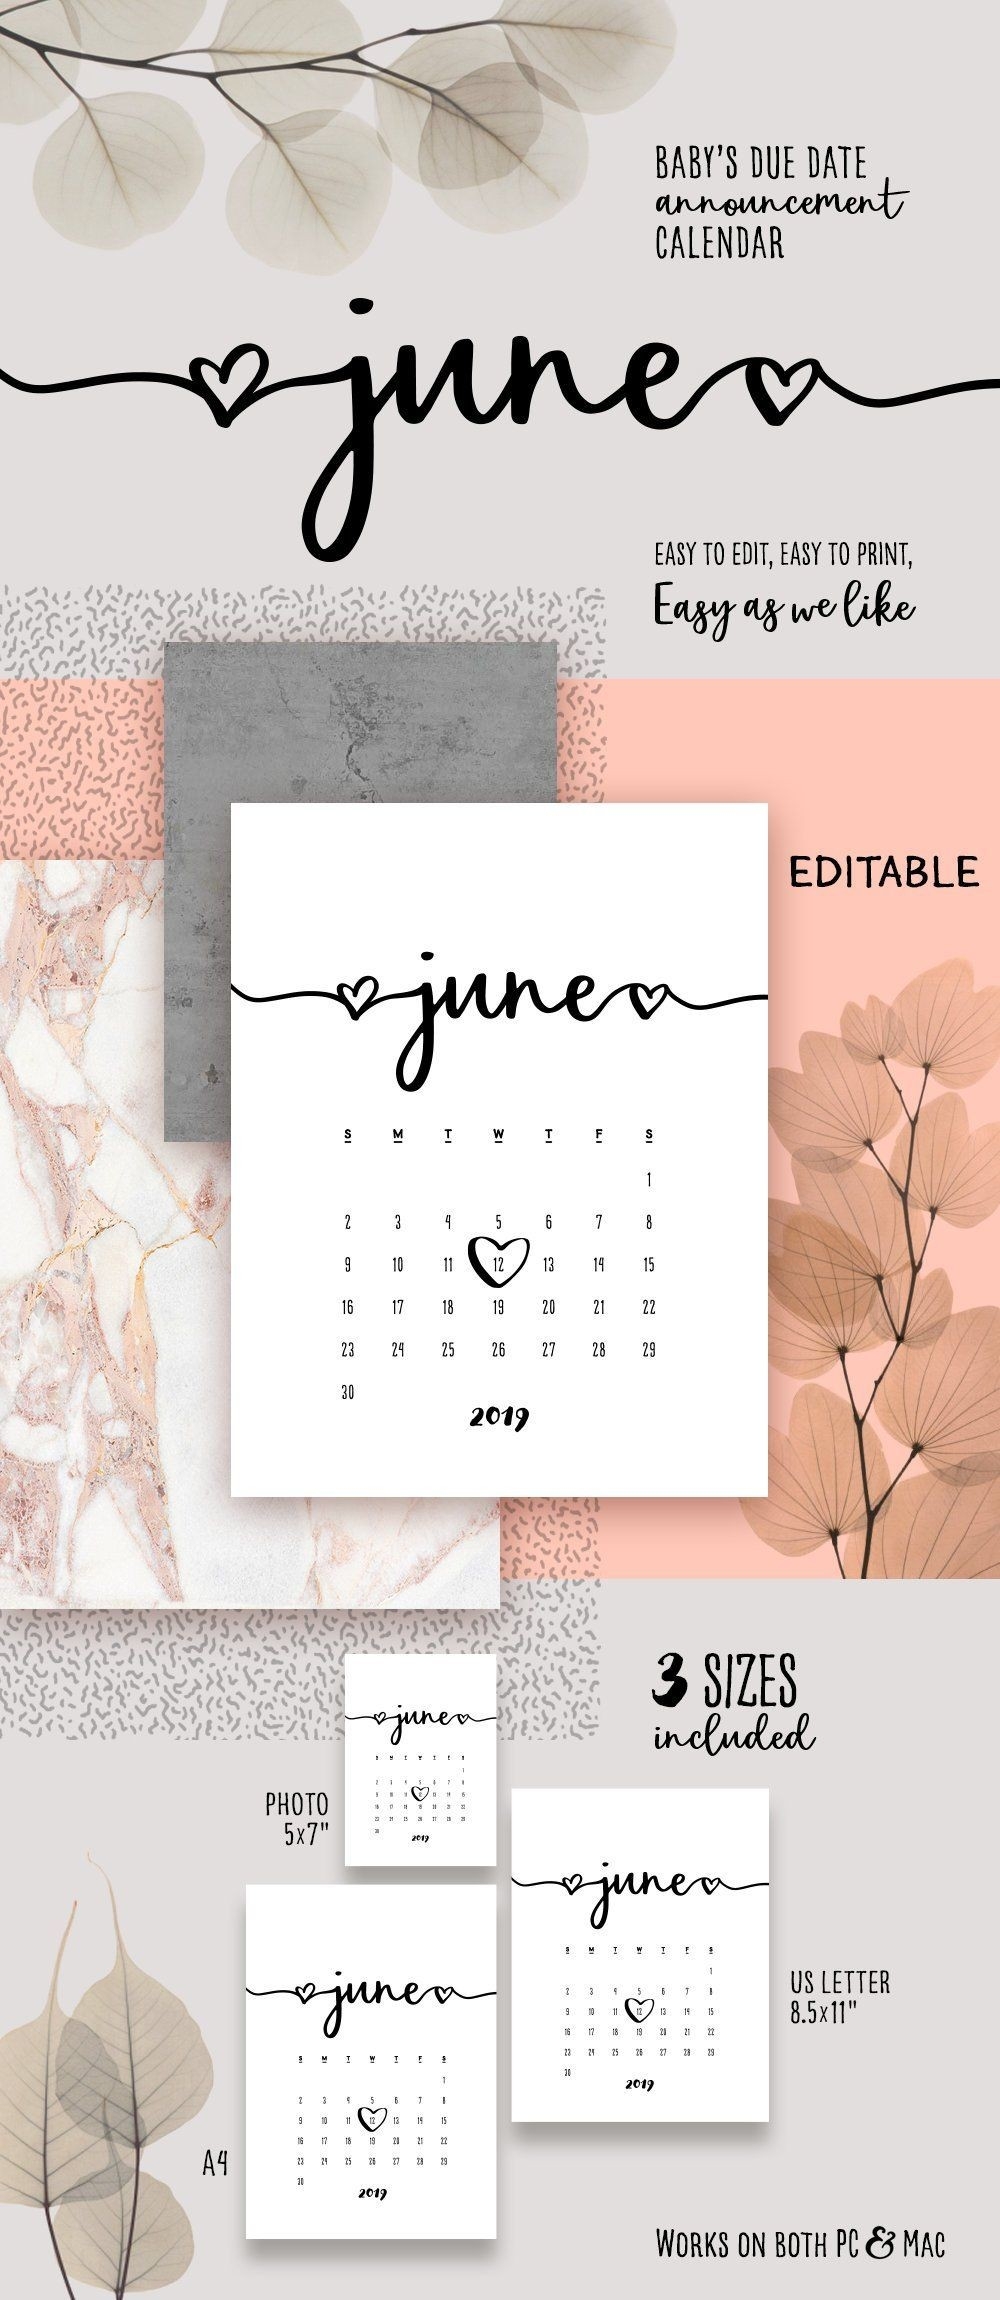 Pin On Oh Baby.-Bady Due Date Calendar August 2020 Template